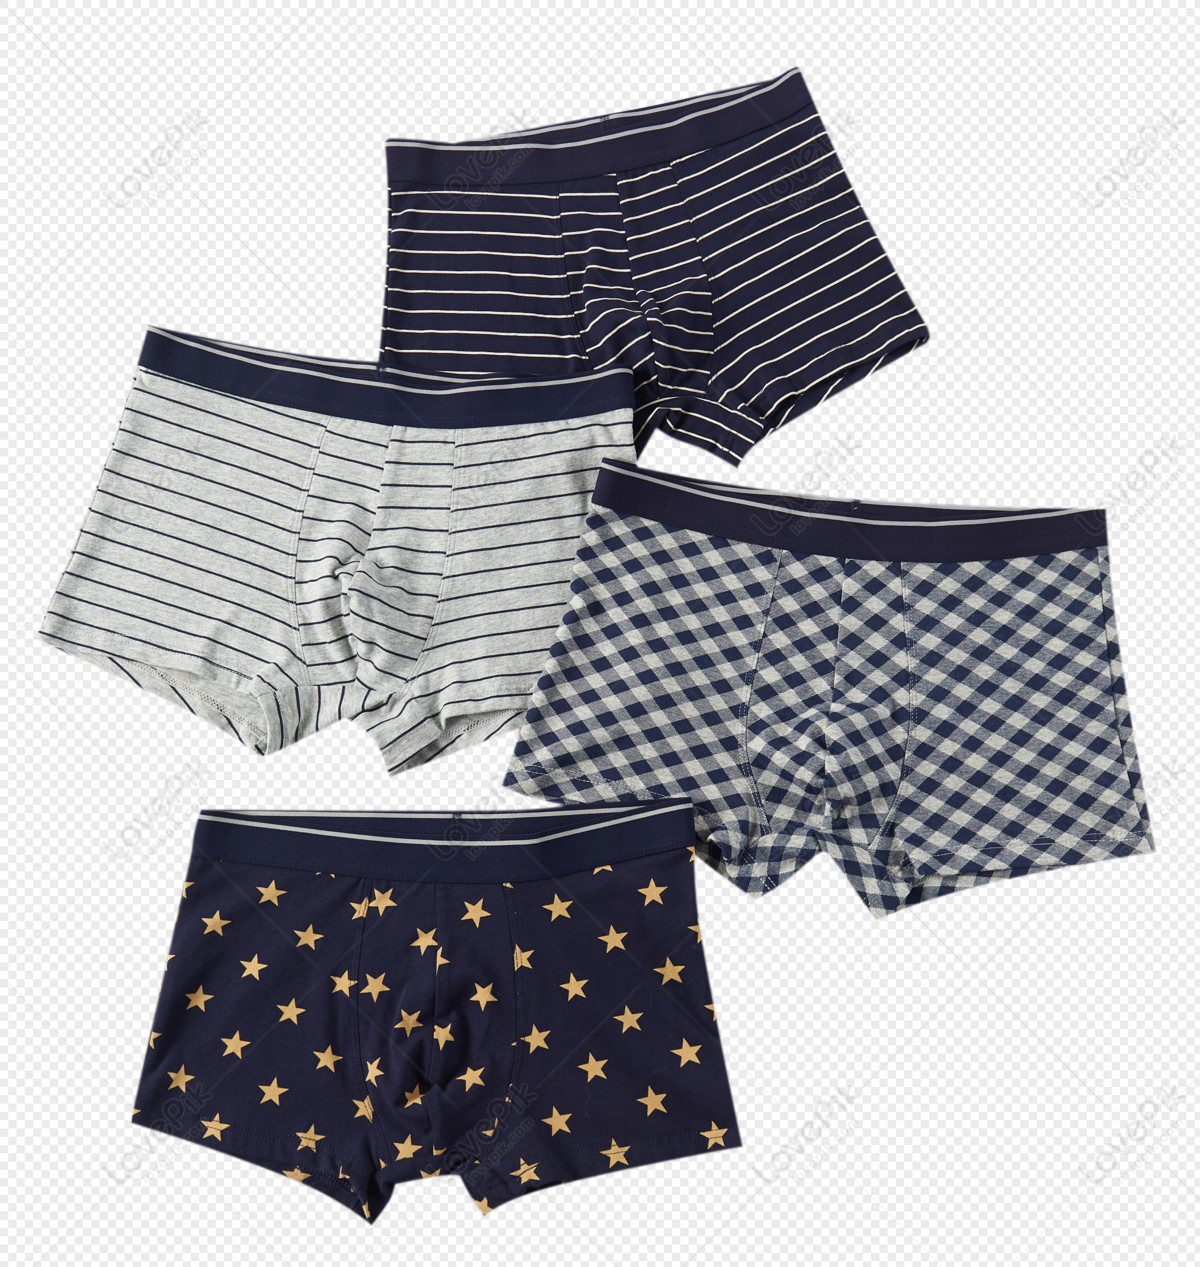 Silk Underwear PNG Transparent Images Free Download, Vector Files